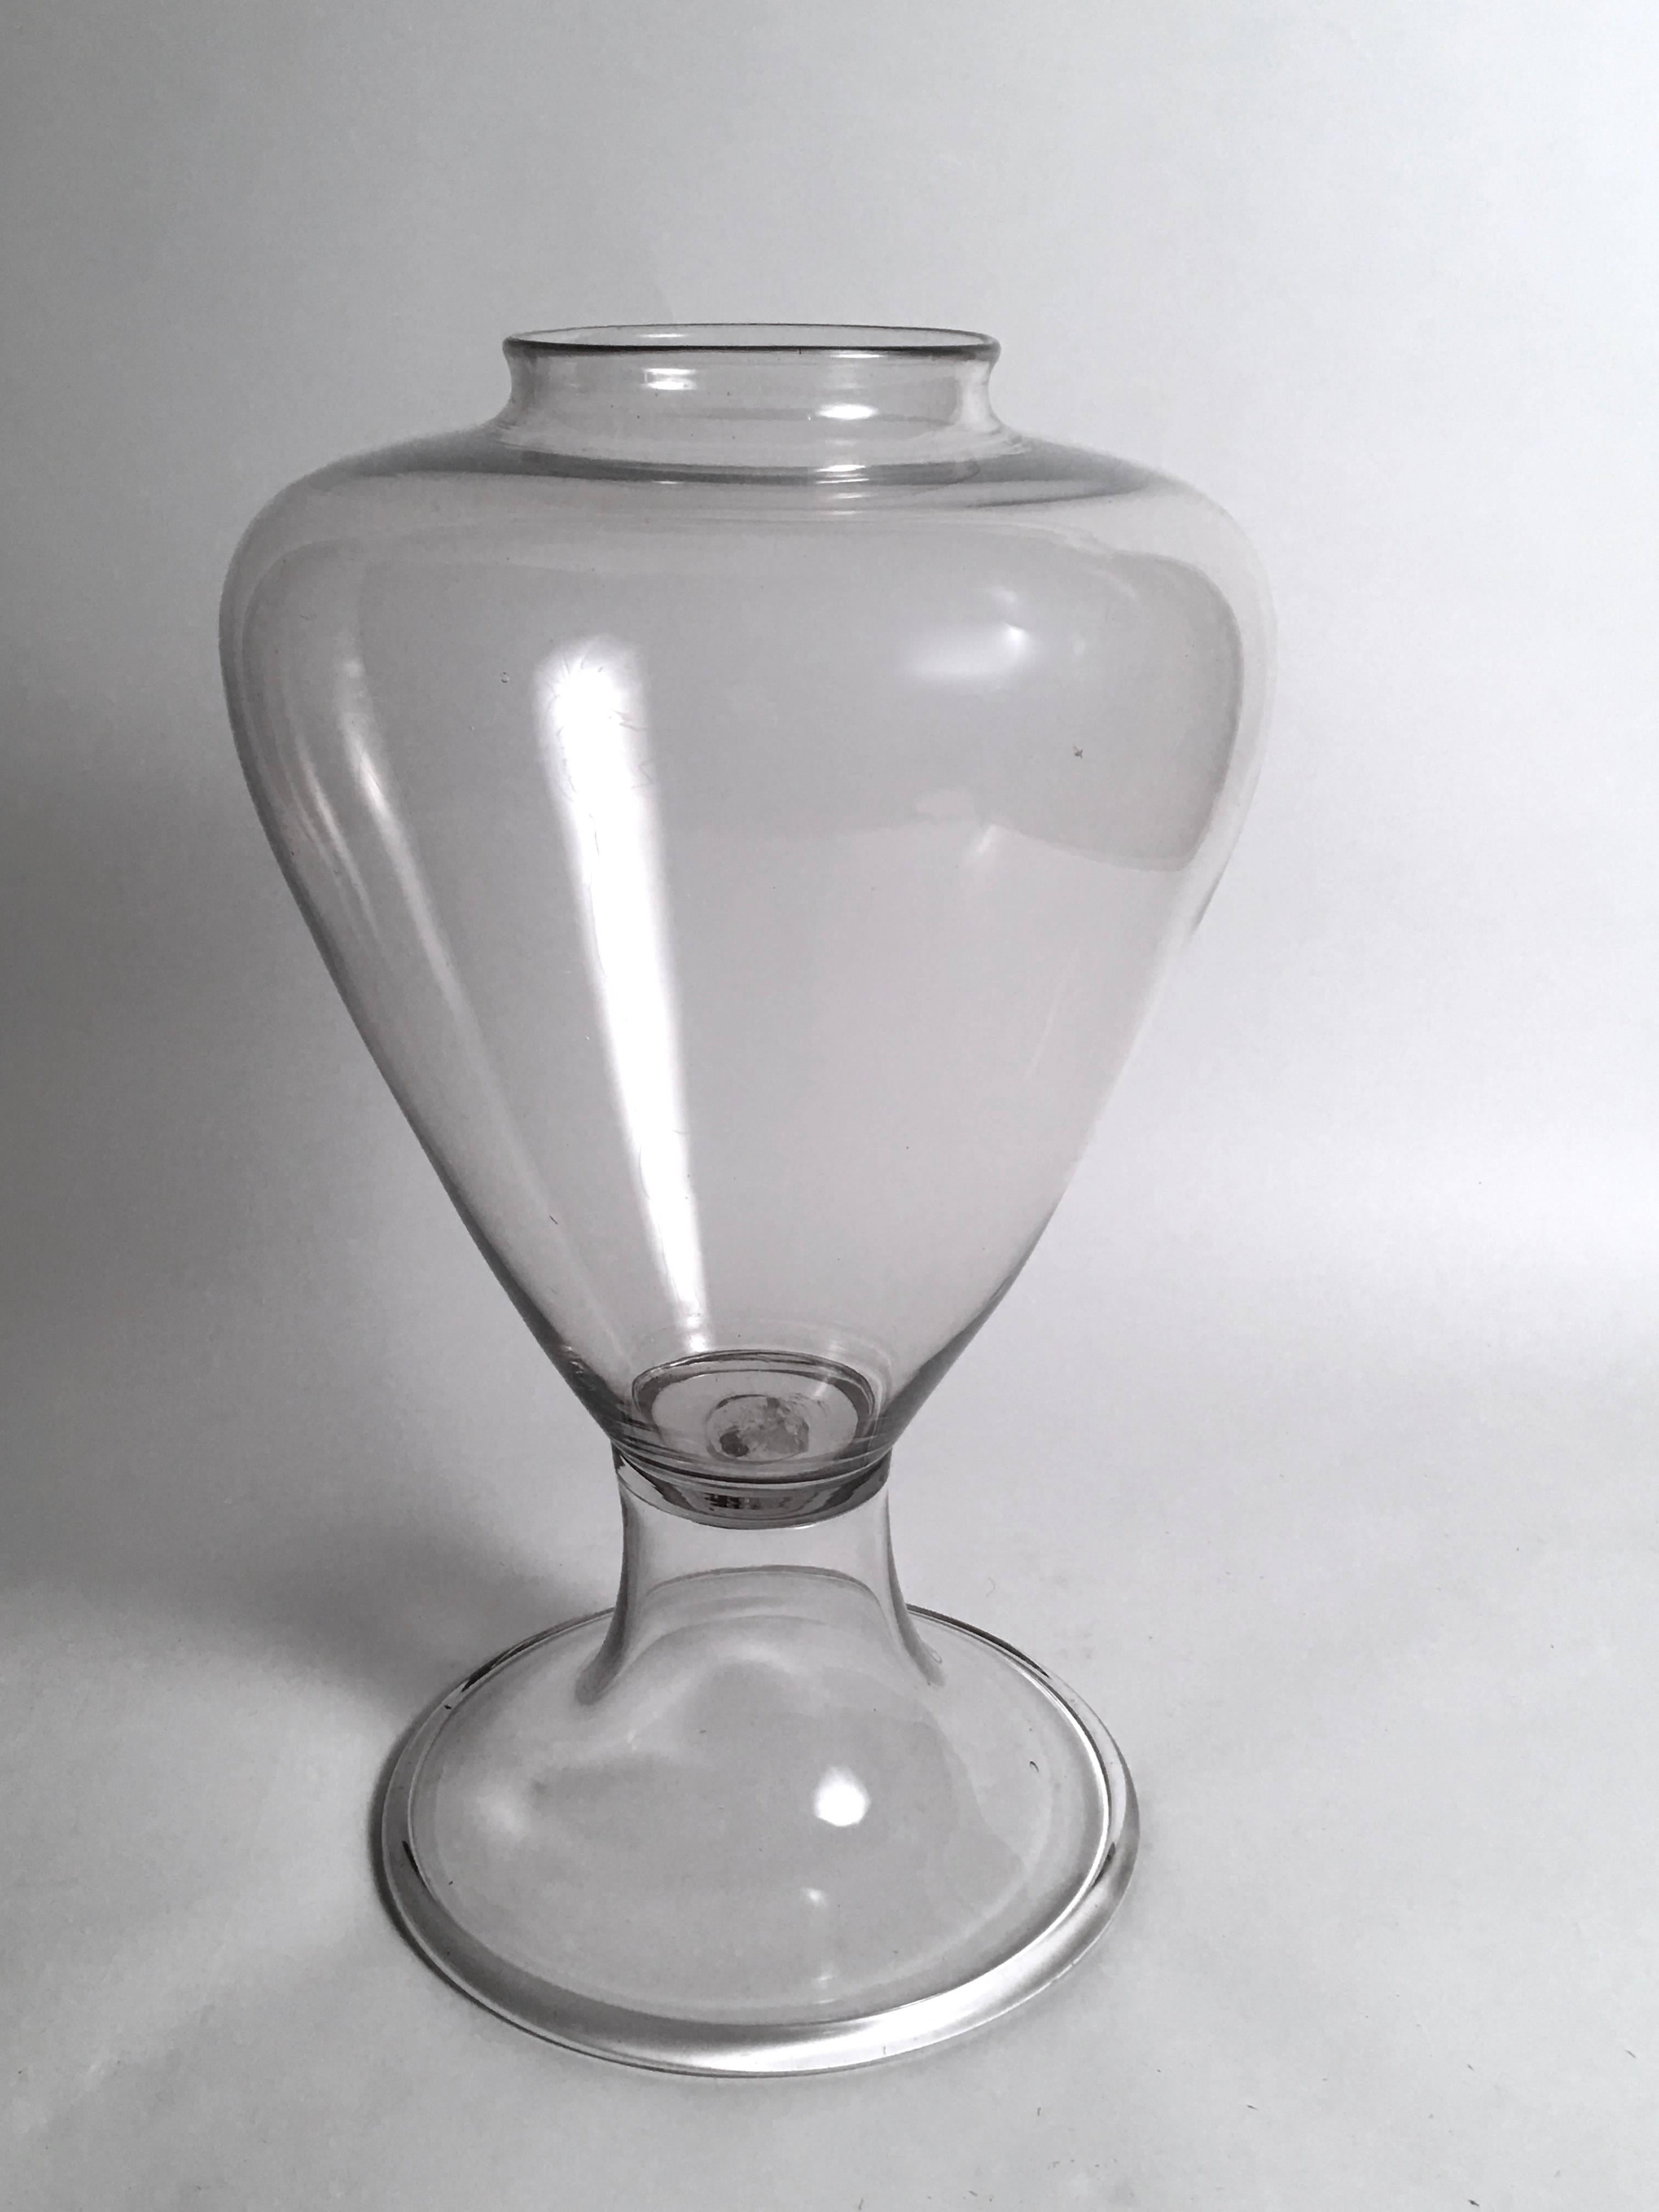 A large 19th century colorless blown glass apothecary jar, made in two sections, the top part with a circular opening over high shoulders tapering down to the spreading, trumpet form base with rolled edges. This unusual apothecary jar would be